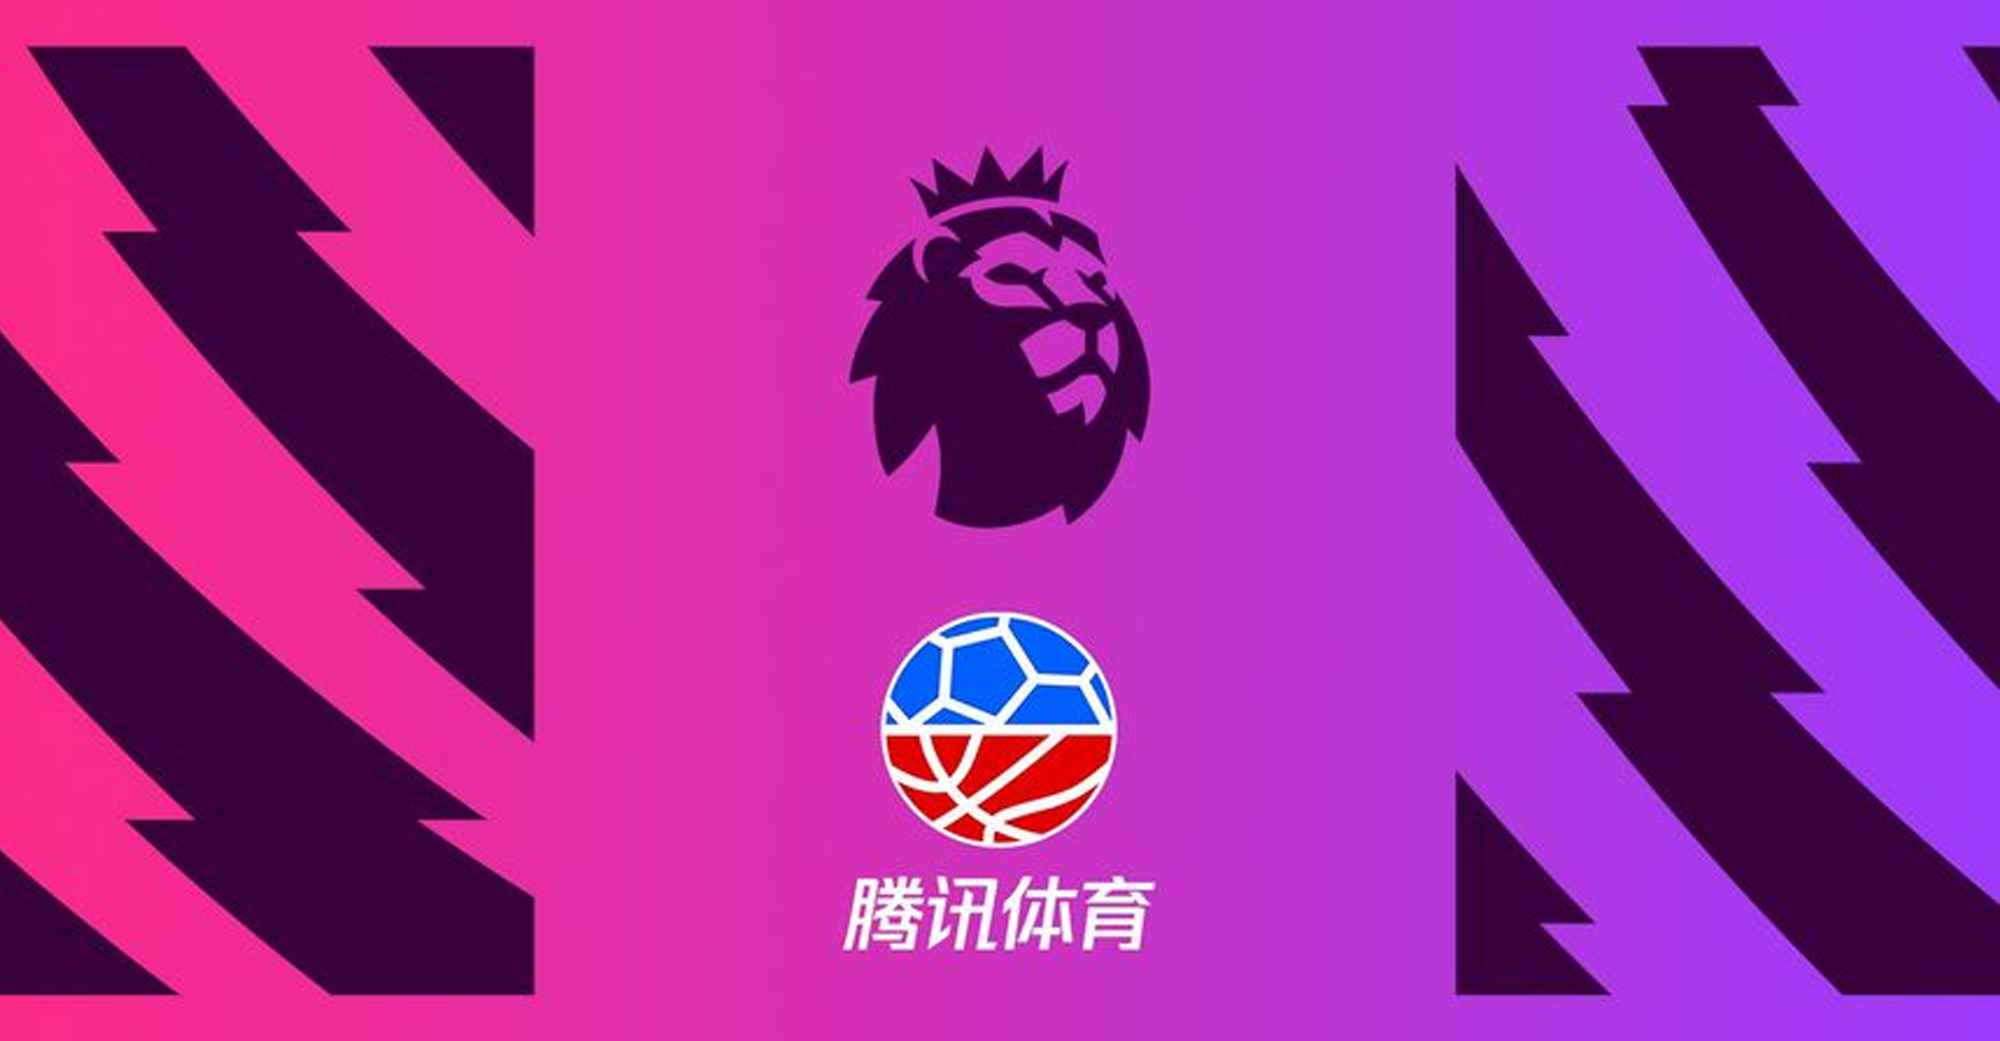 Tencent Sports Signs One-year Broadcast Deal with Premier League